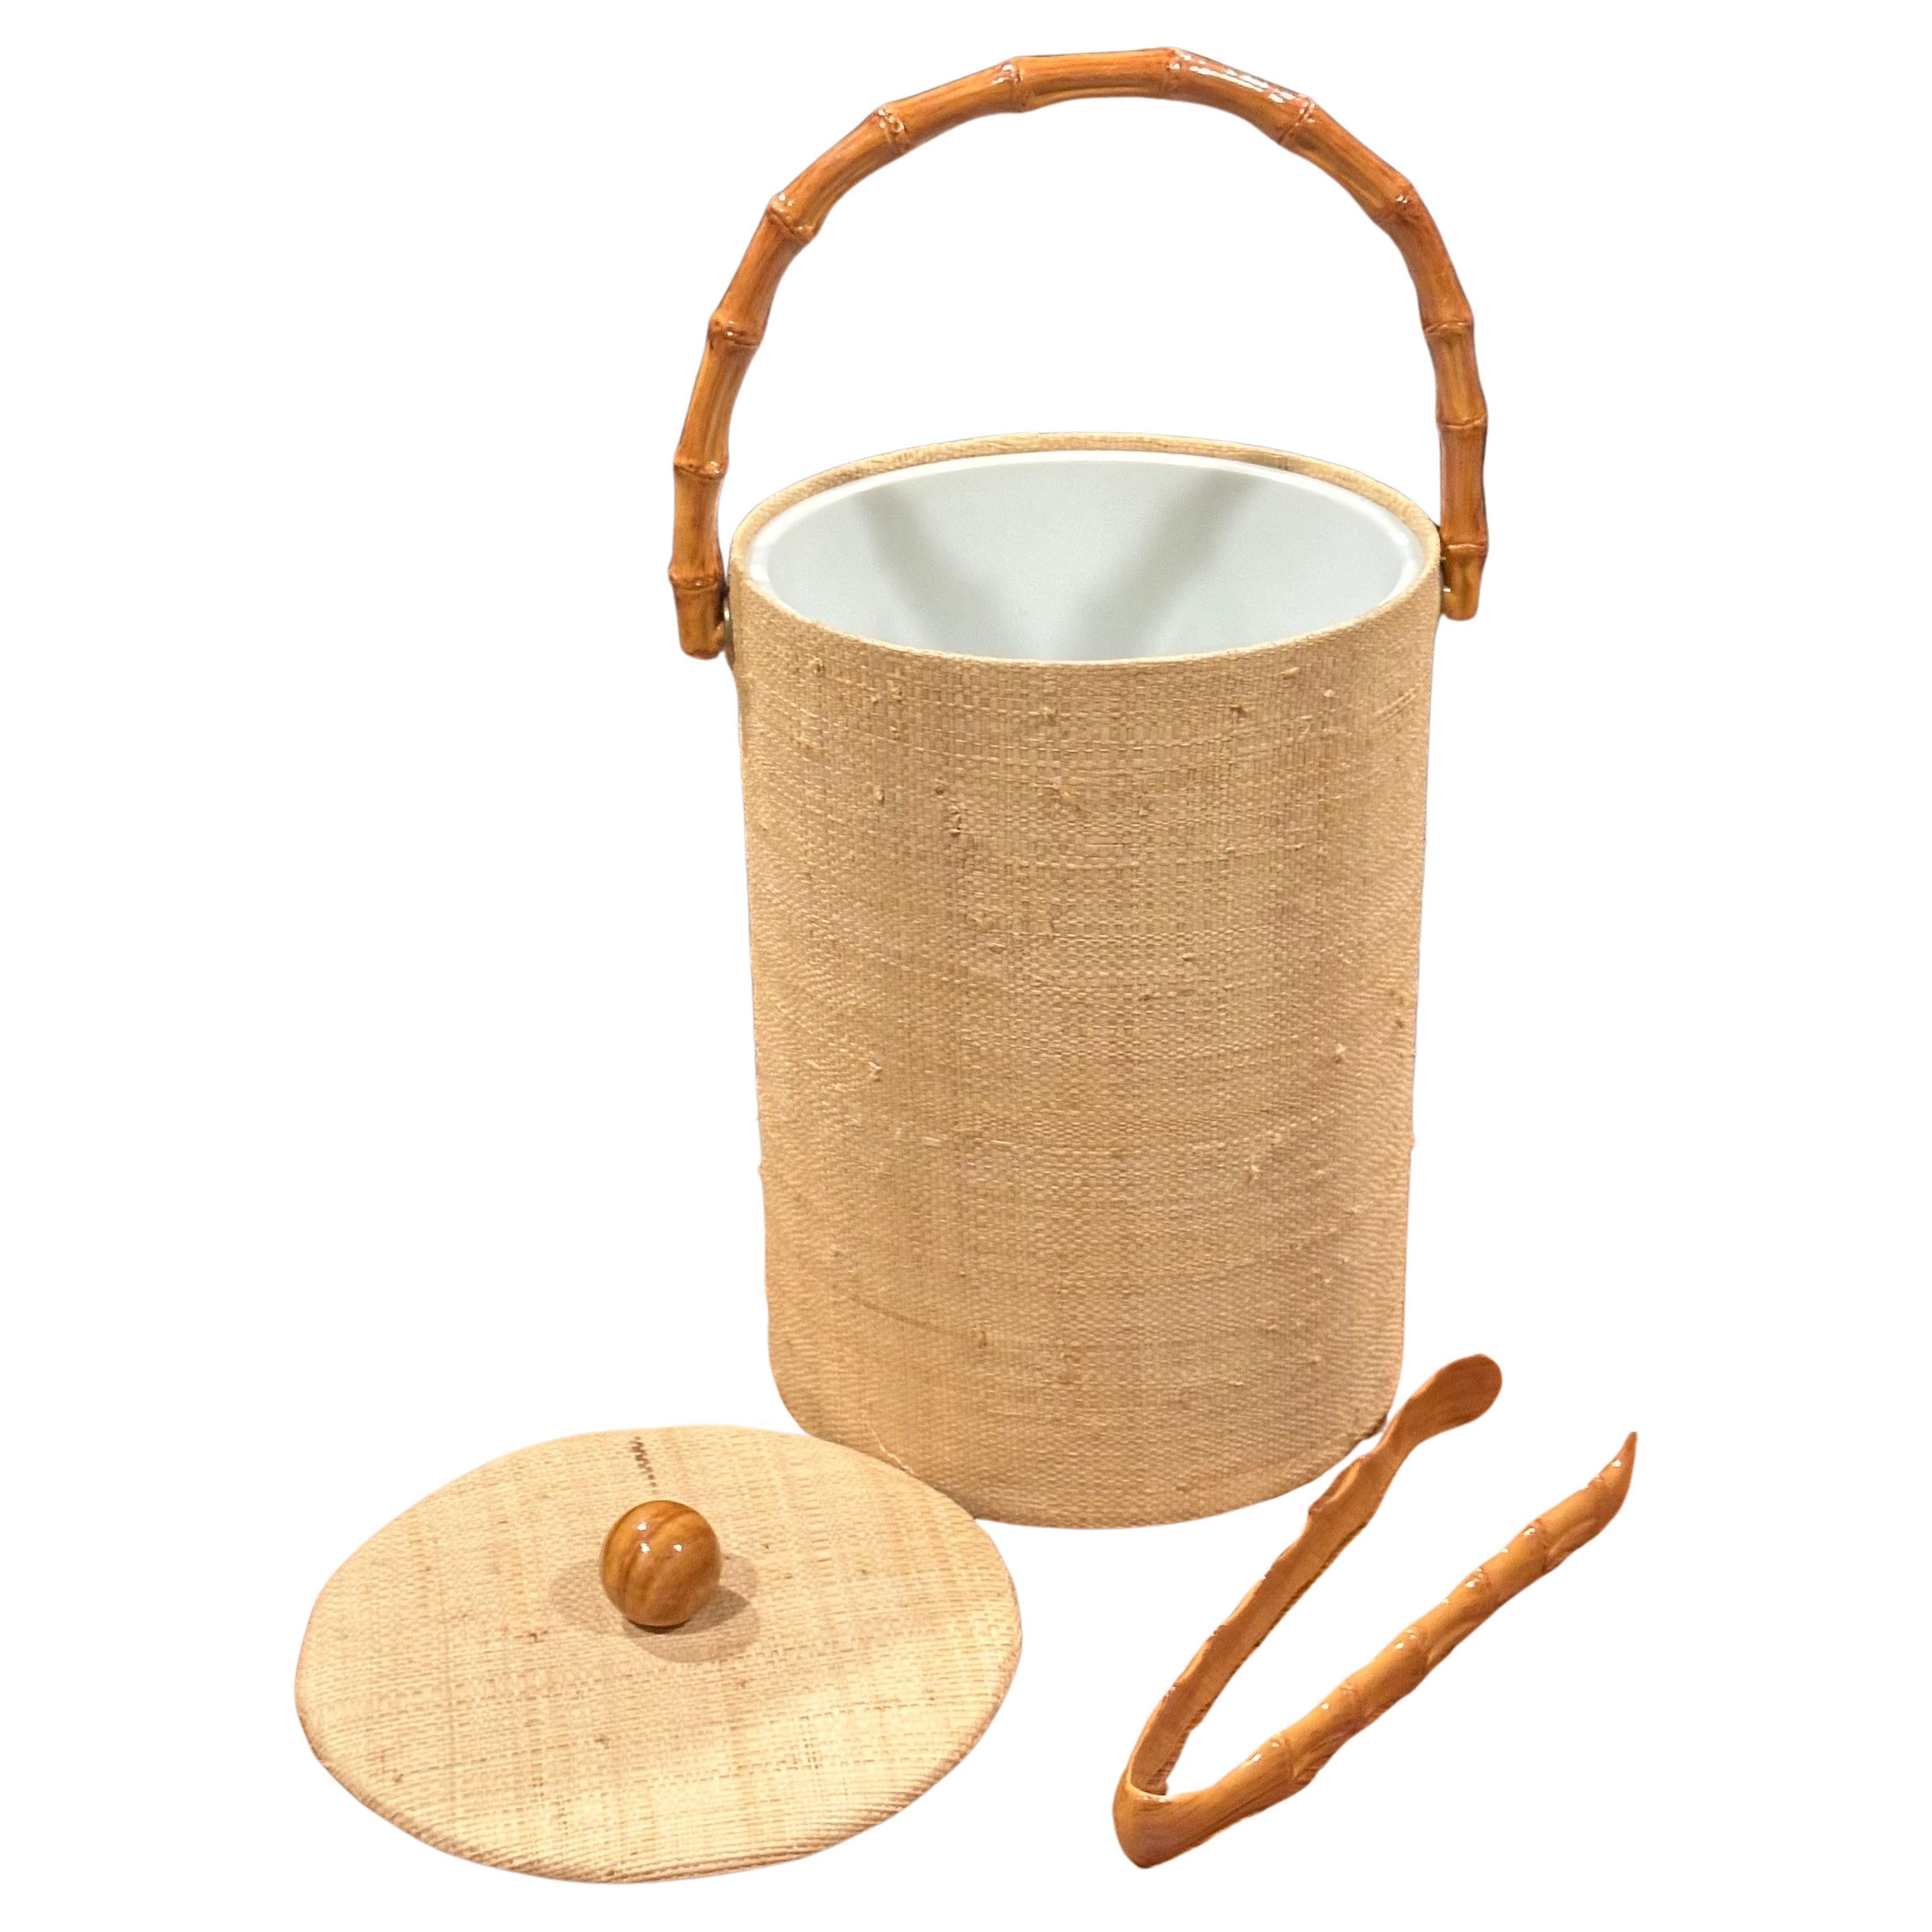 A very nice MCM grass cloth and bamboo ice bucket with tongs, circa 1970s. The set includes a pair of bamboo ice tongs and is in very good vintage condition; it measures 7.5